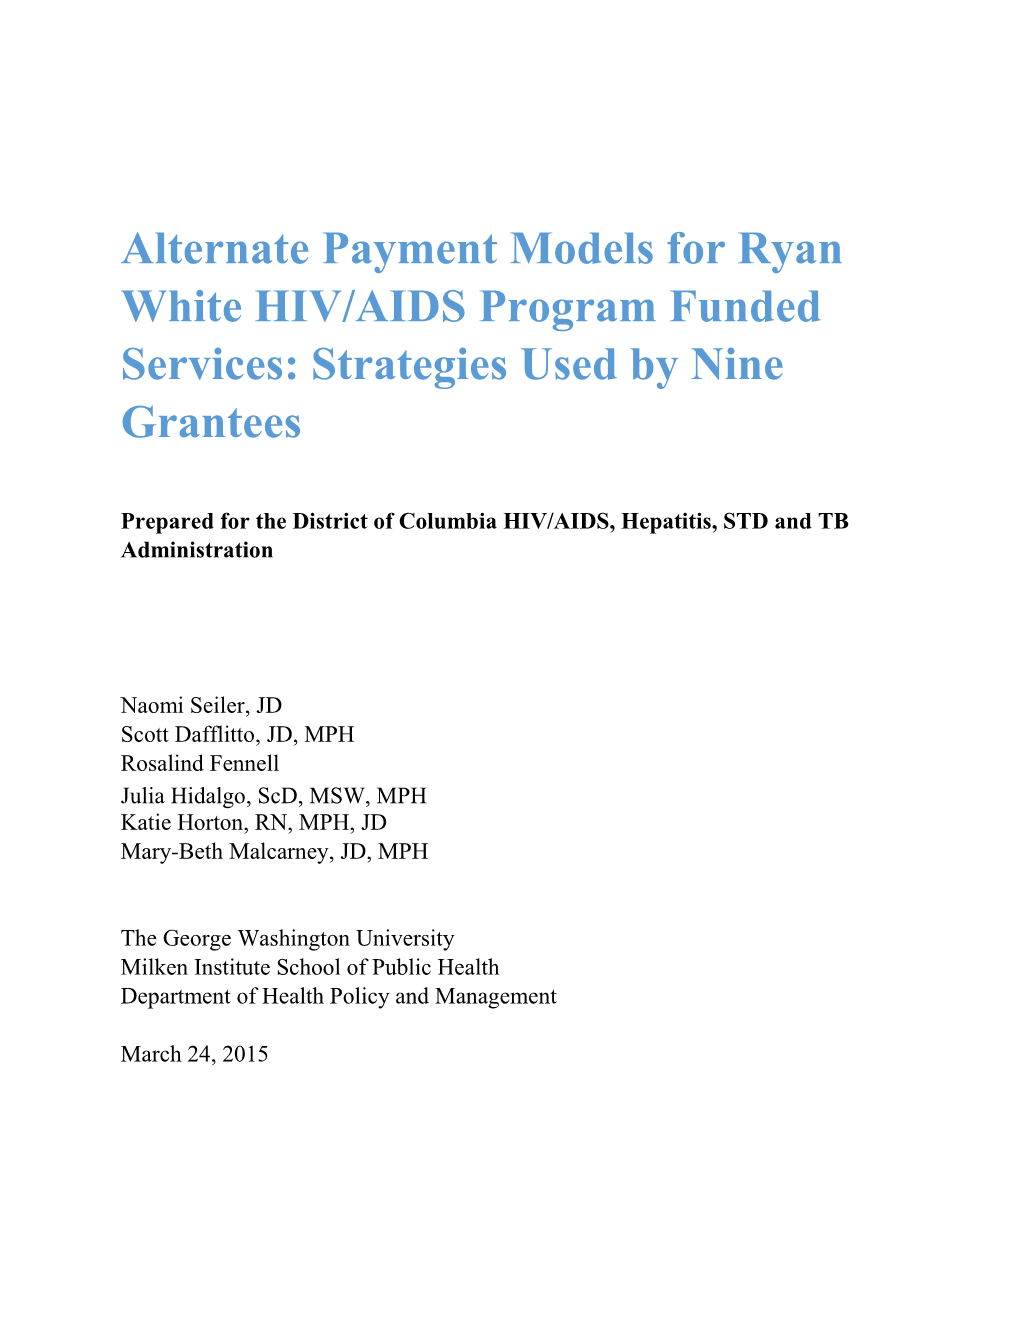 Alternate Payment Models for Ryan White HIV/AIDS Program Funded Services: Strategies Used by Nine Grantees